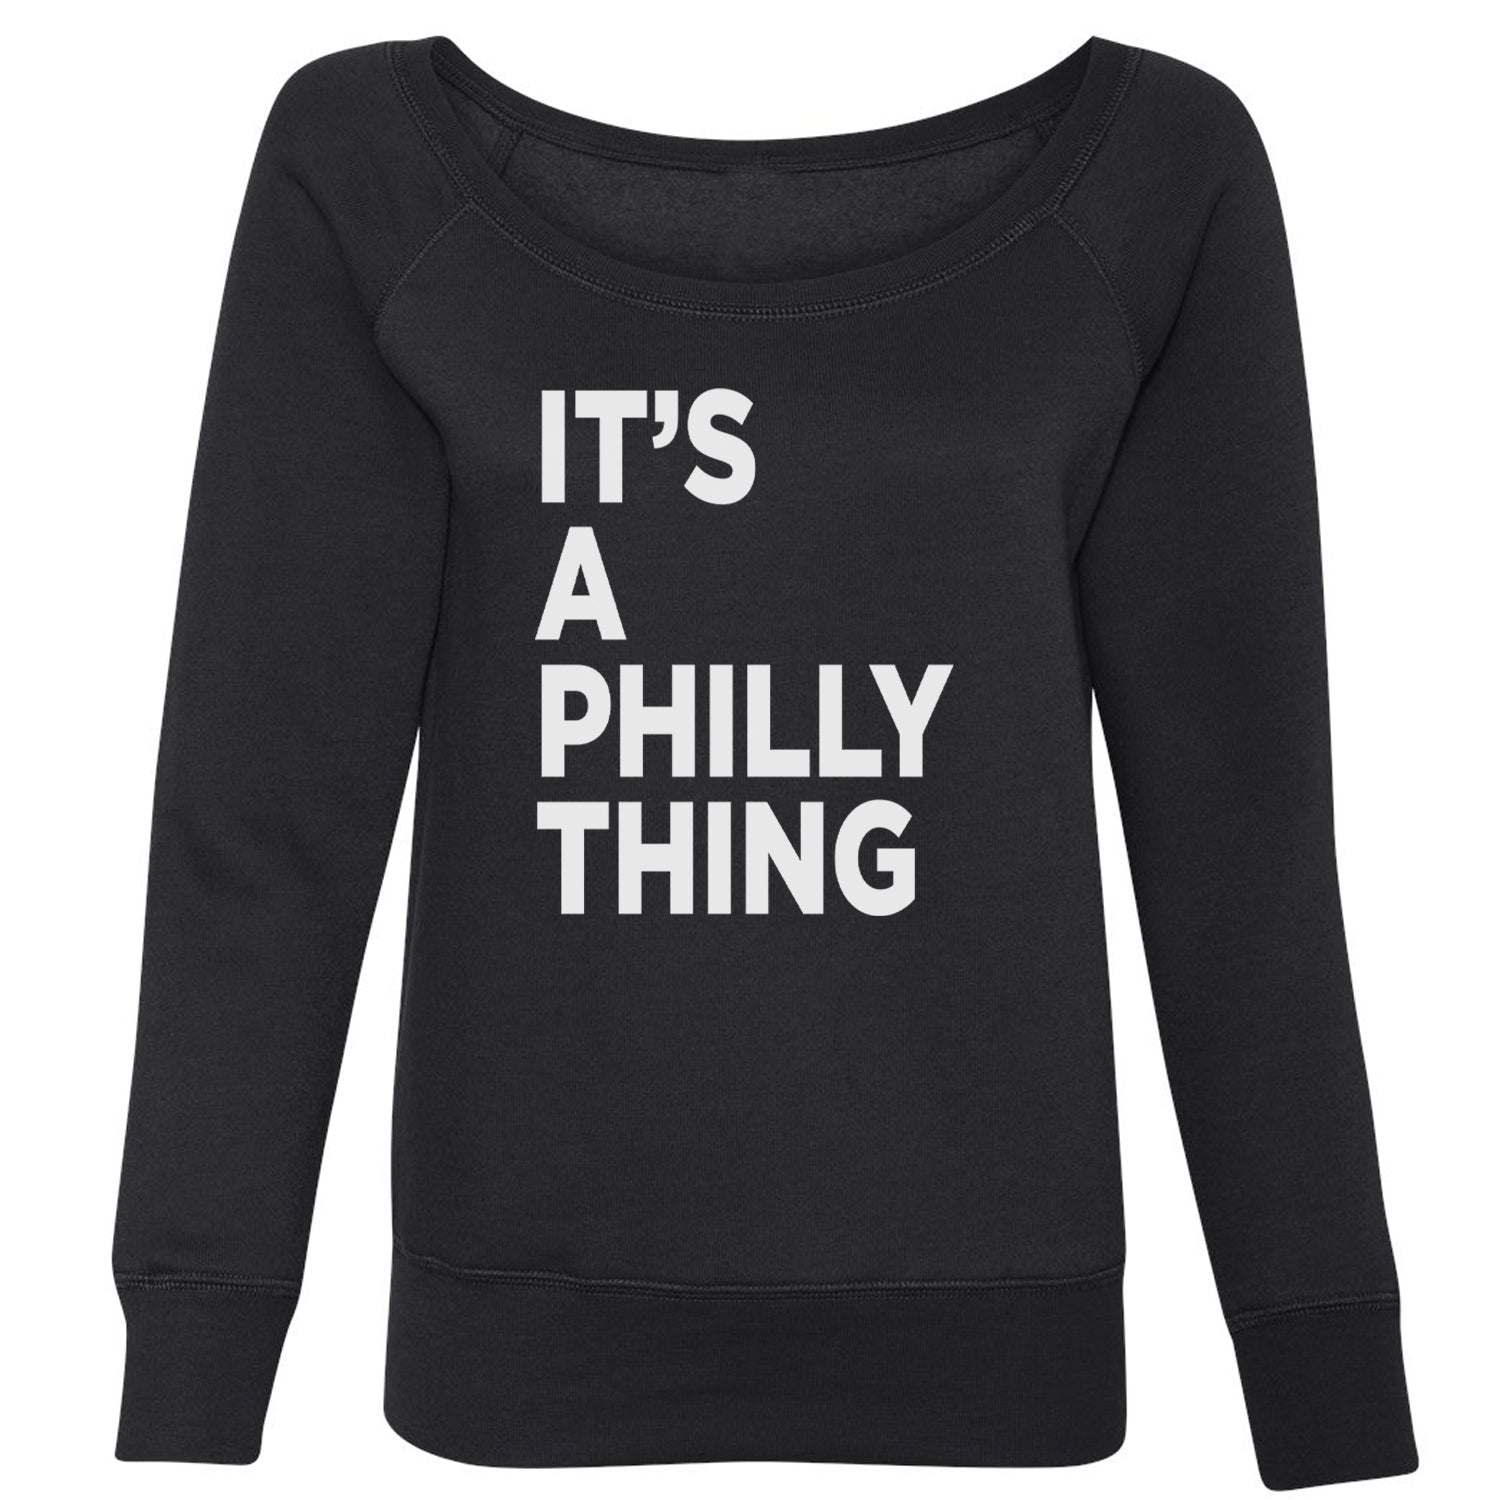 PHILLY It's A Philly Thing Slouchy Off Shoulder Oversized Sweatshirt baseball, dilly, filly, football, jawn, morgan, Philadelphia, philli by Expression Tees